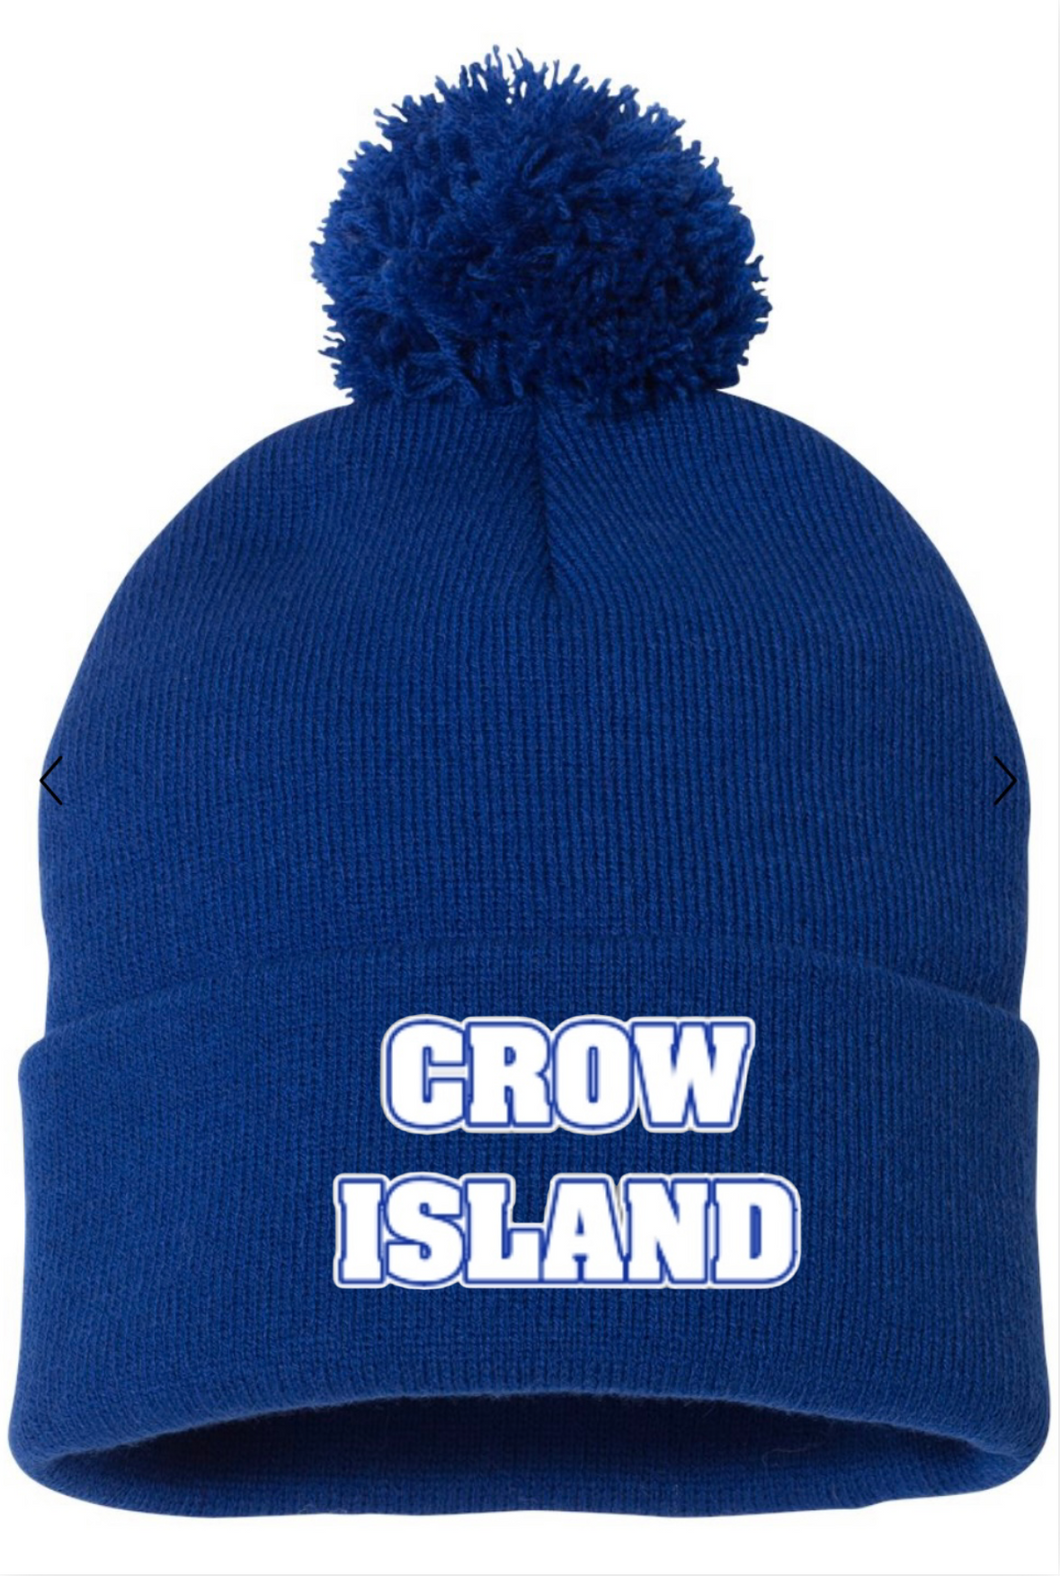 Crow Island Blue Pom Beanie - Order by 11/20 for Book Fair Delivery